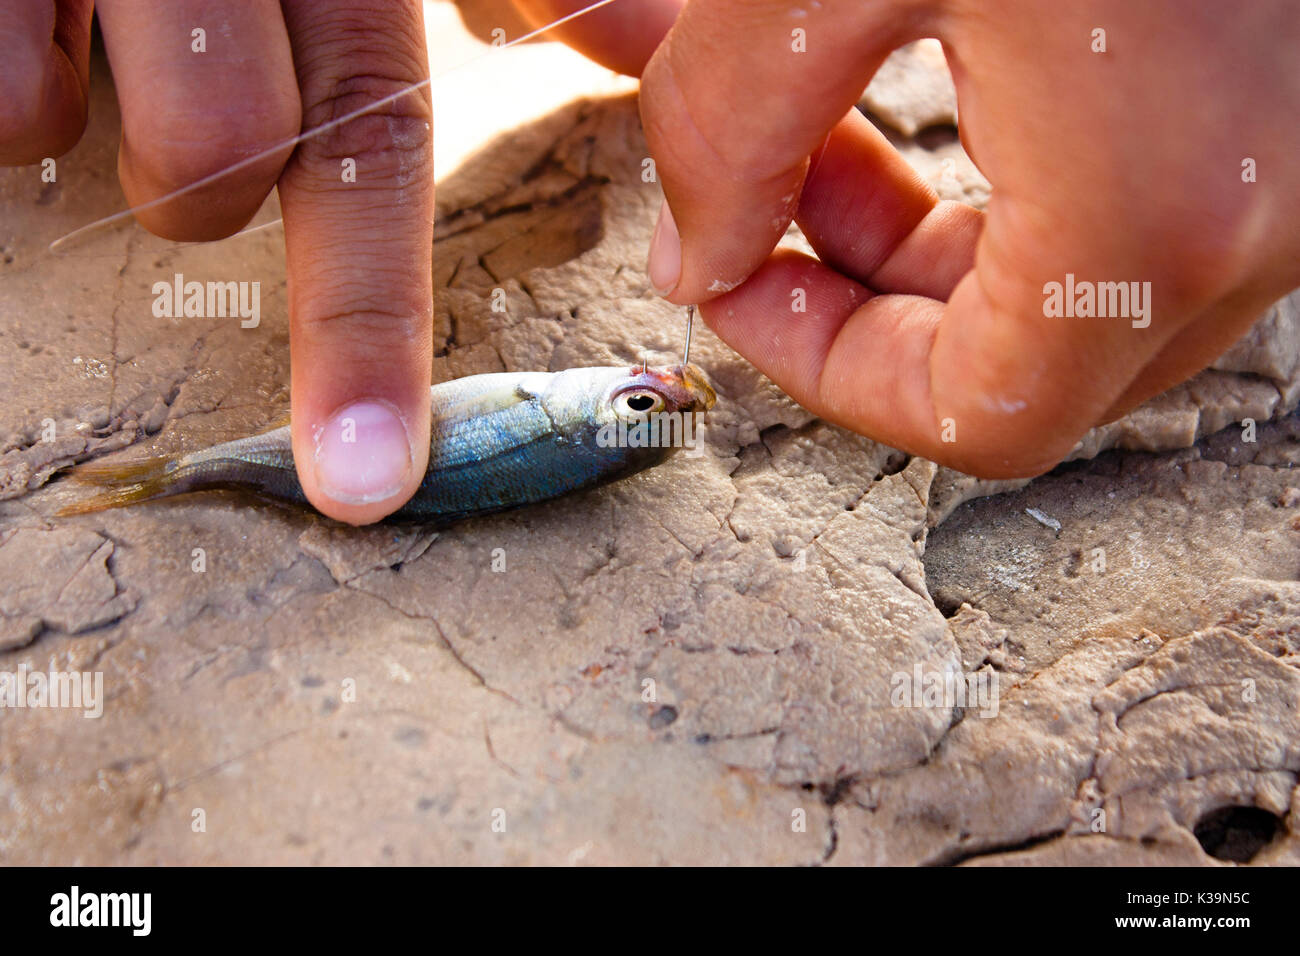 Catch and release : Little sprat fish caught  on a hook on a rock and boy's hands taking out the hook for releasing it back to the sea Stock Photo